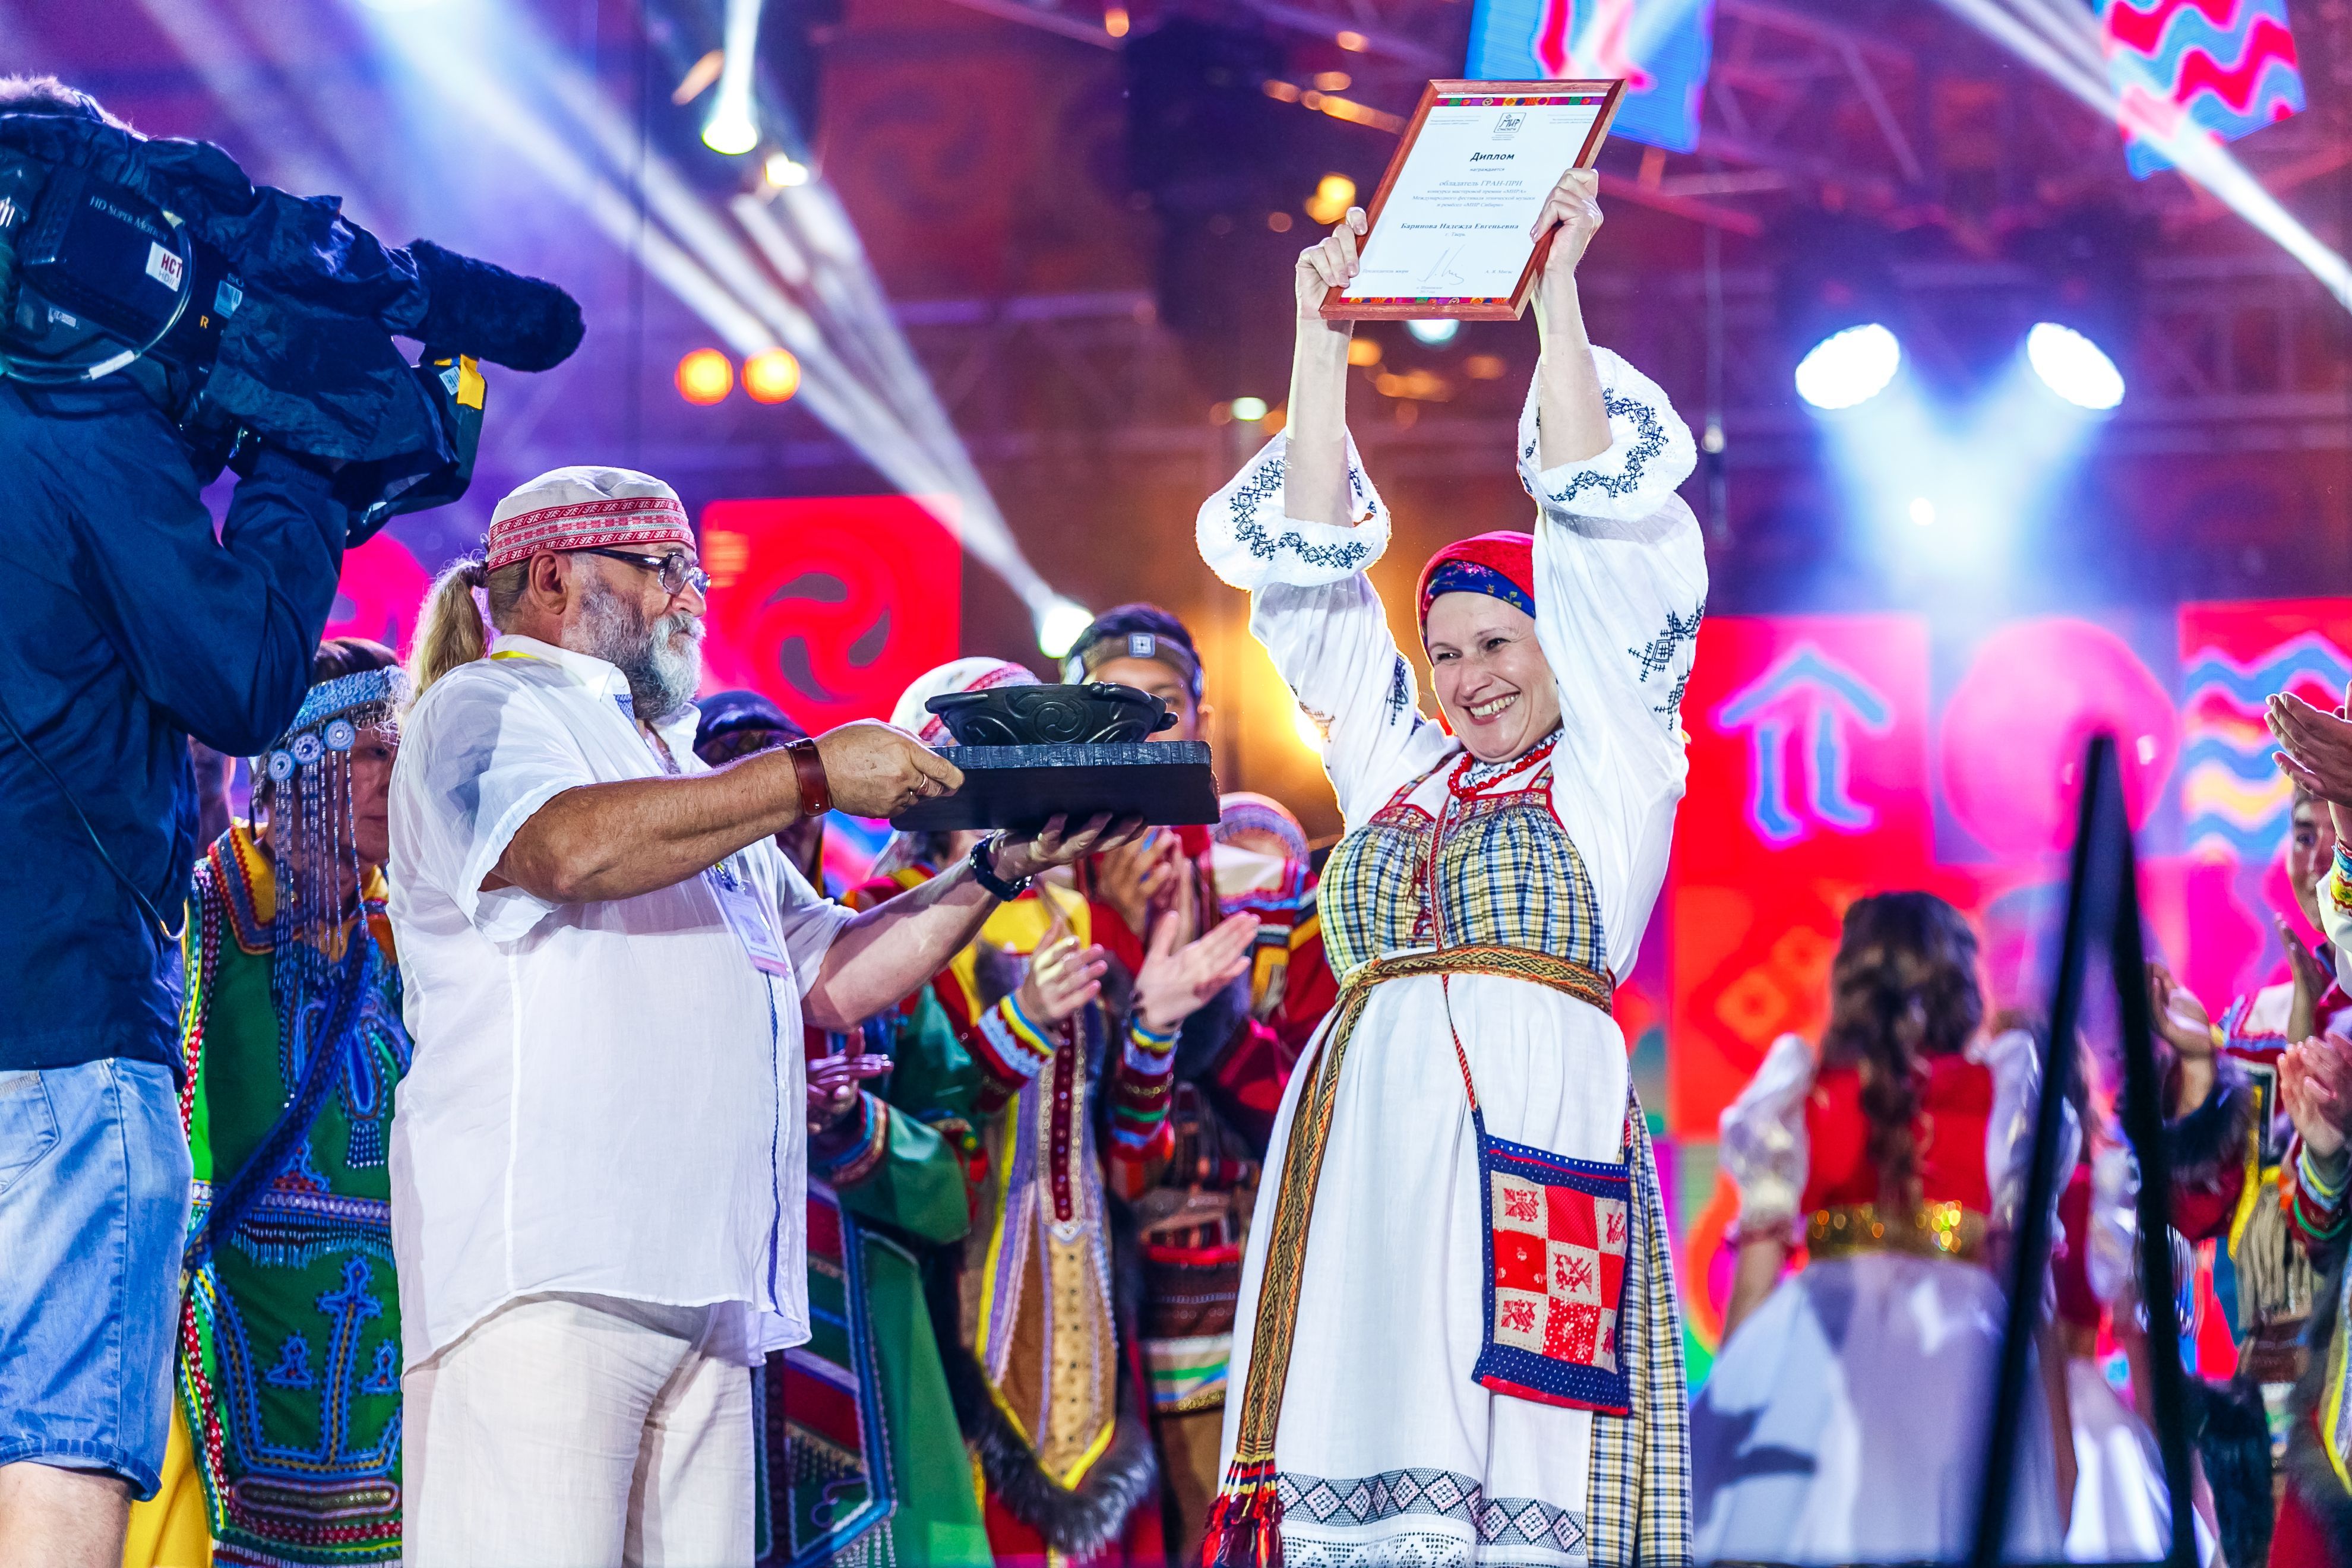 A five-kilogram bowl as the Grand Prix and an impressive prize fund are persuasive arguments to take part in the WORLD of Siberia Festival competition program